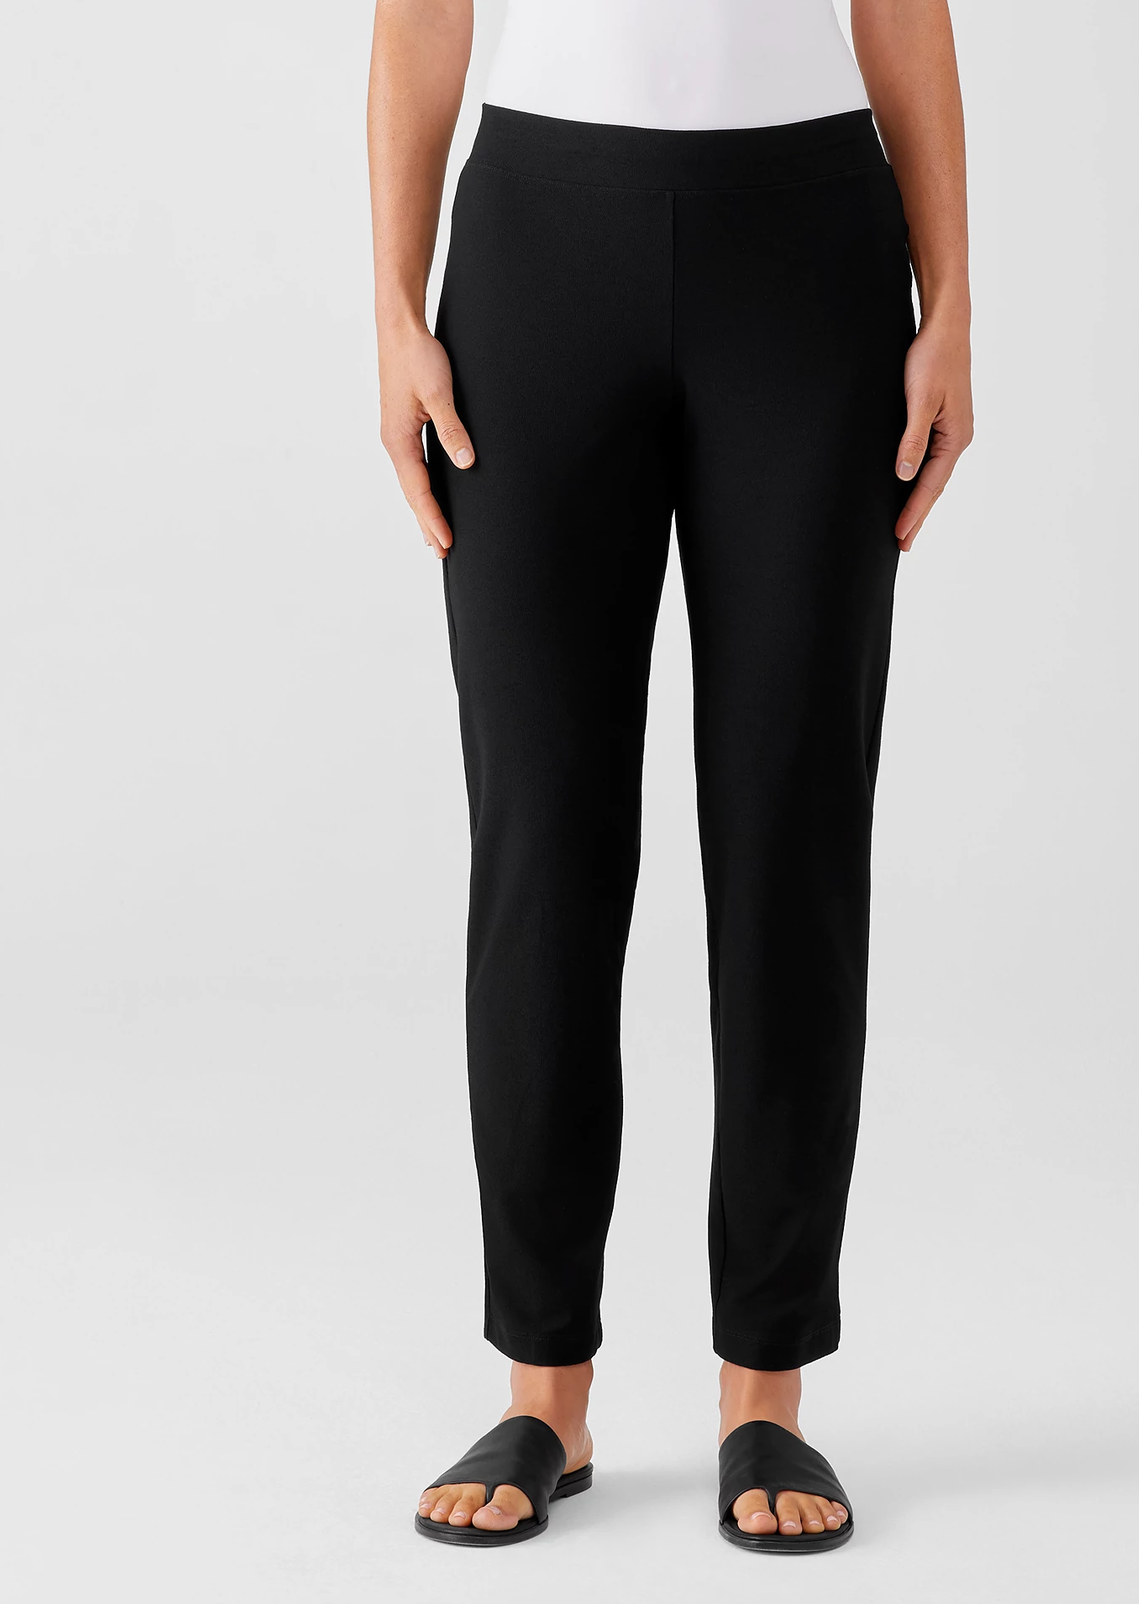 Eileen Fisher - Washable Stretch Crepe Pant